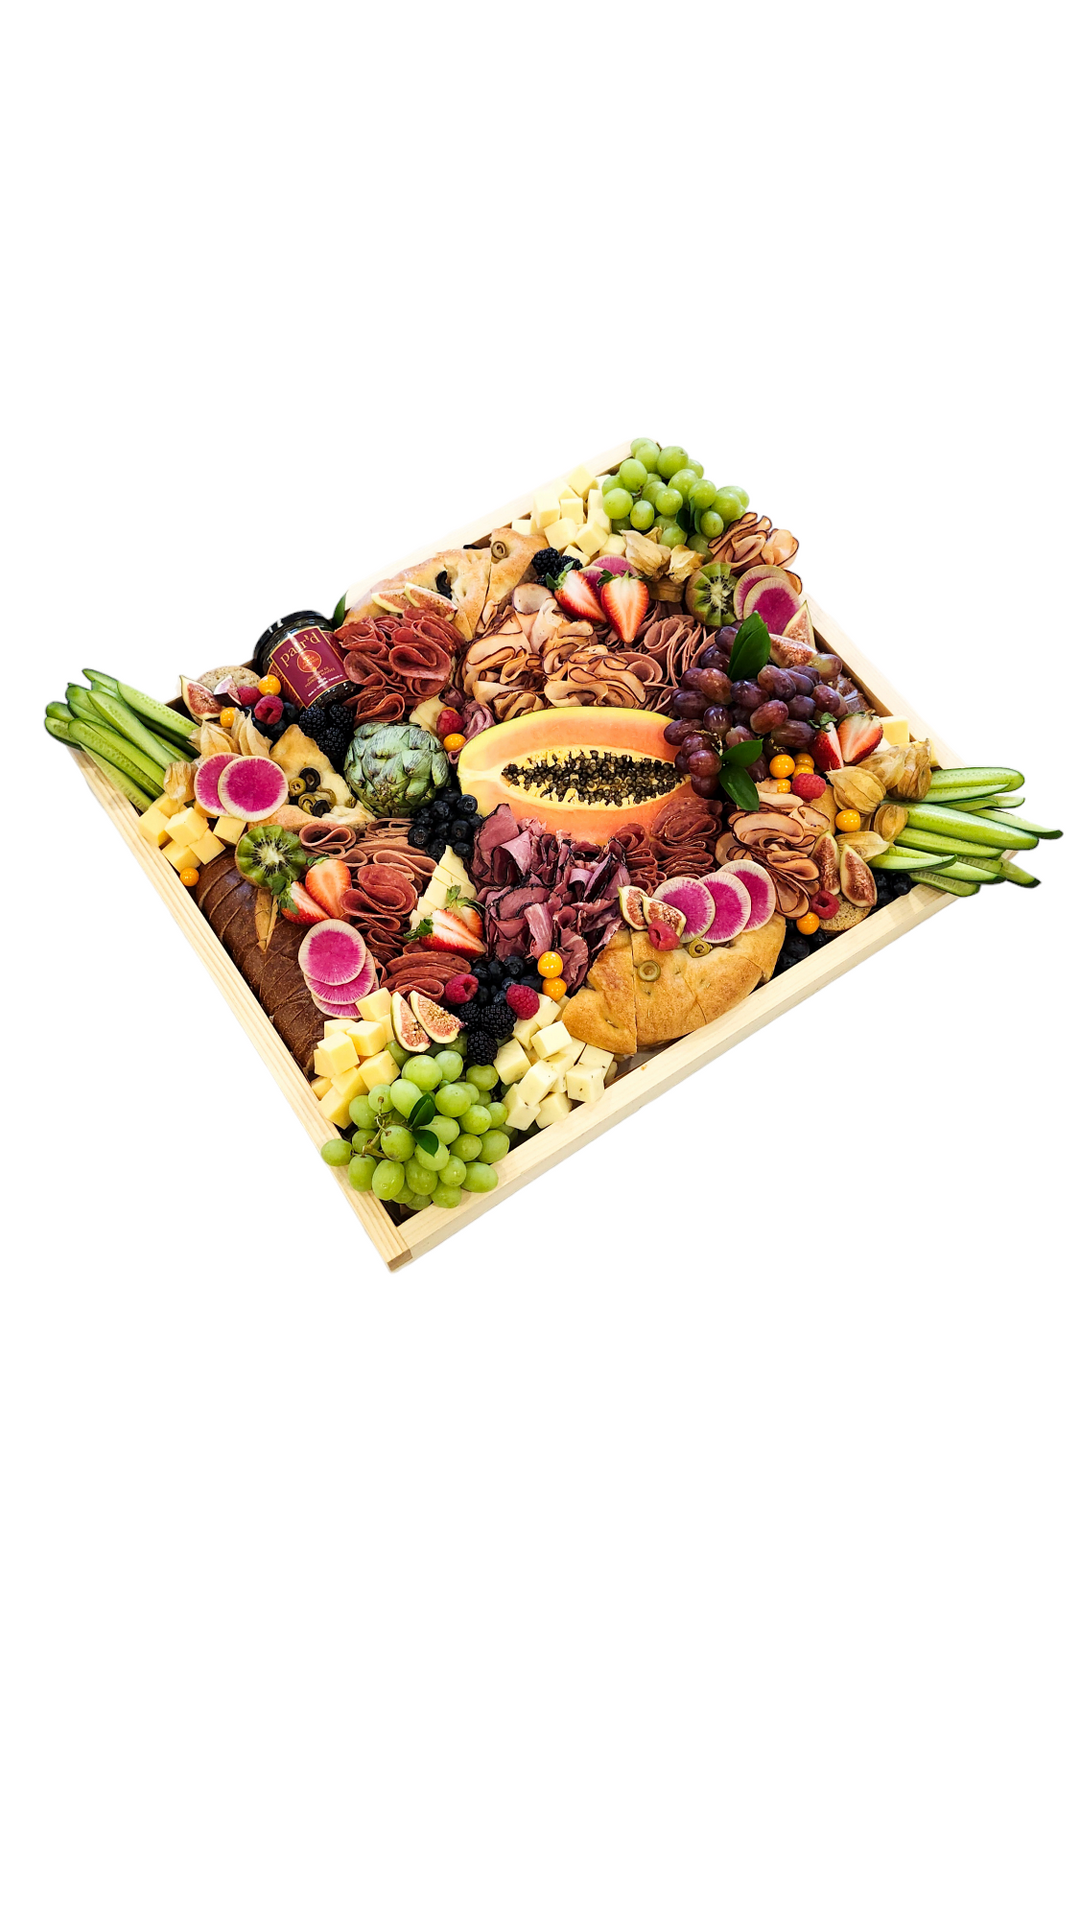 Party size 2 Foot Charcuterie Platter